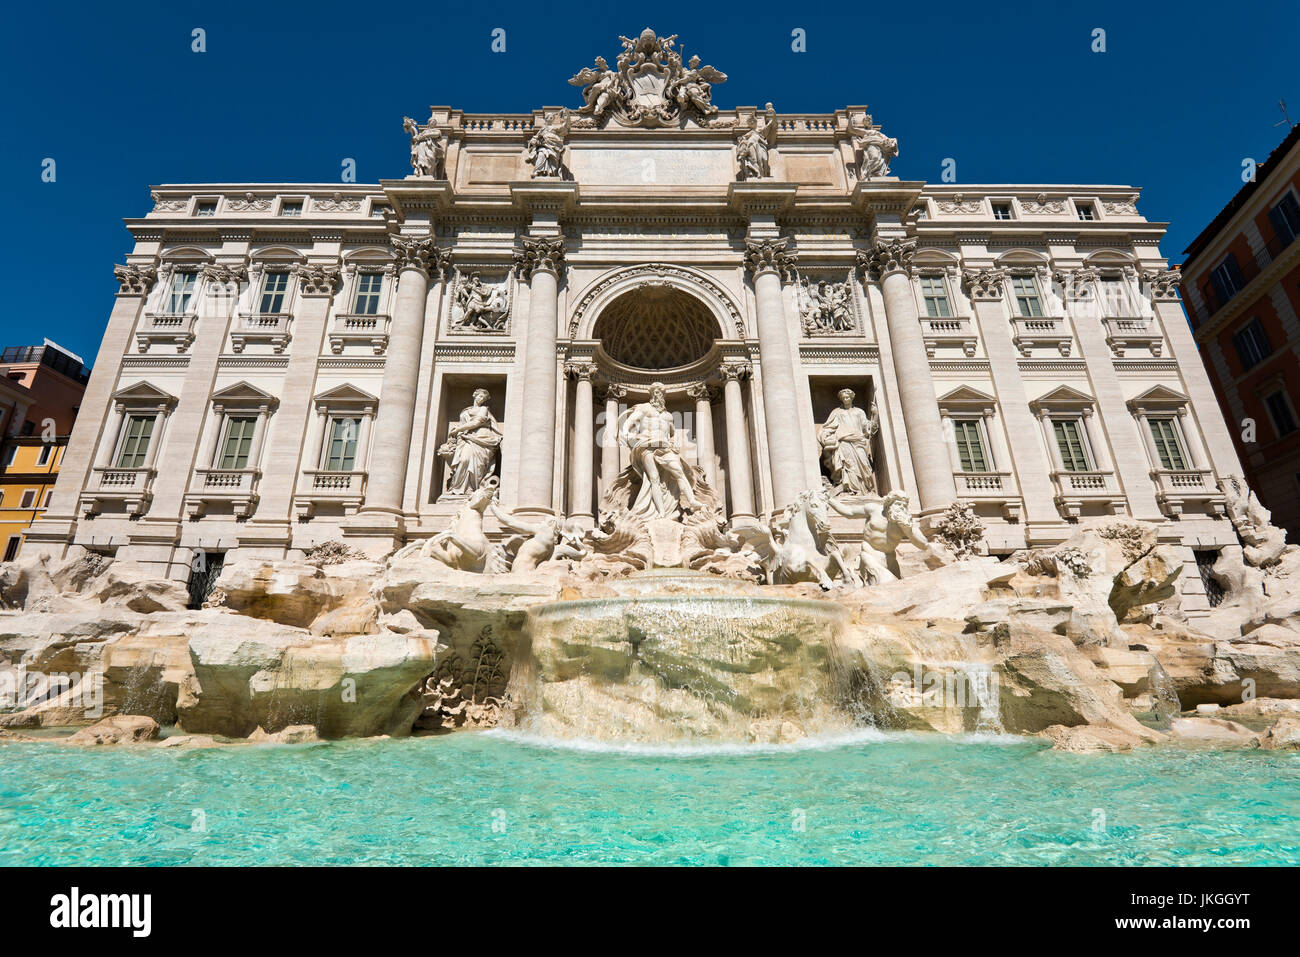 Horizontal close up view of the Trevi Fountain in Rome. Stock Photo